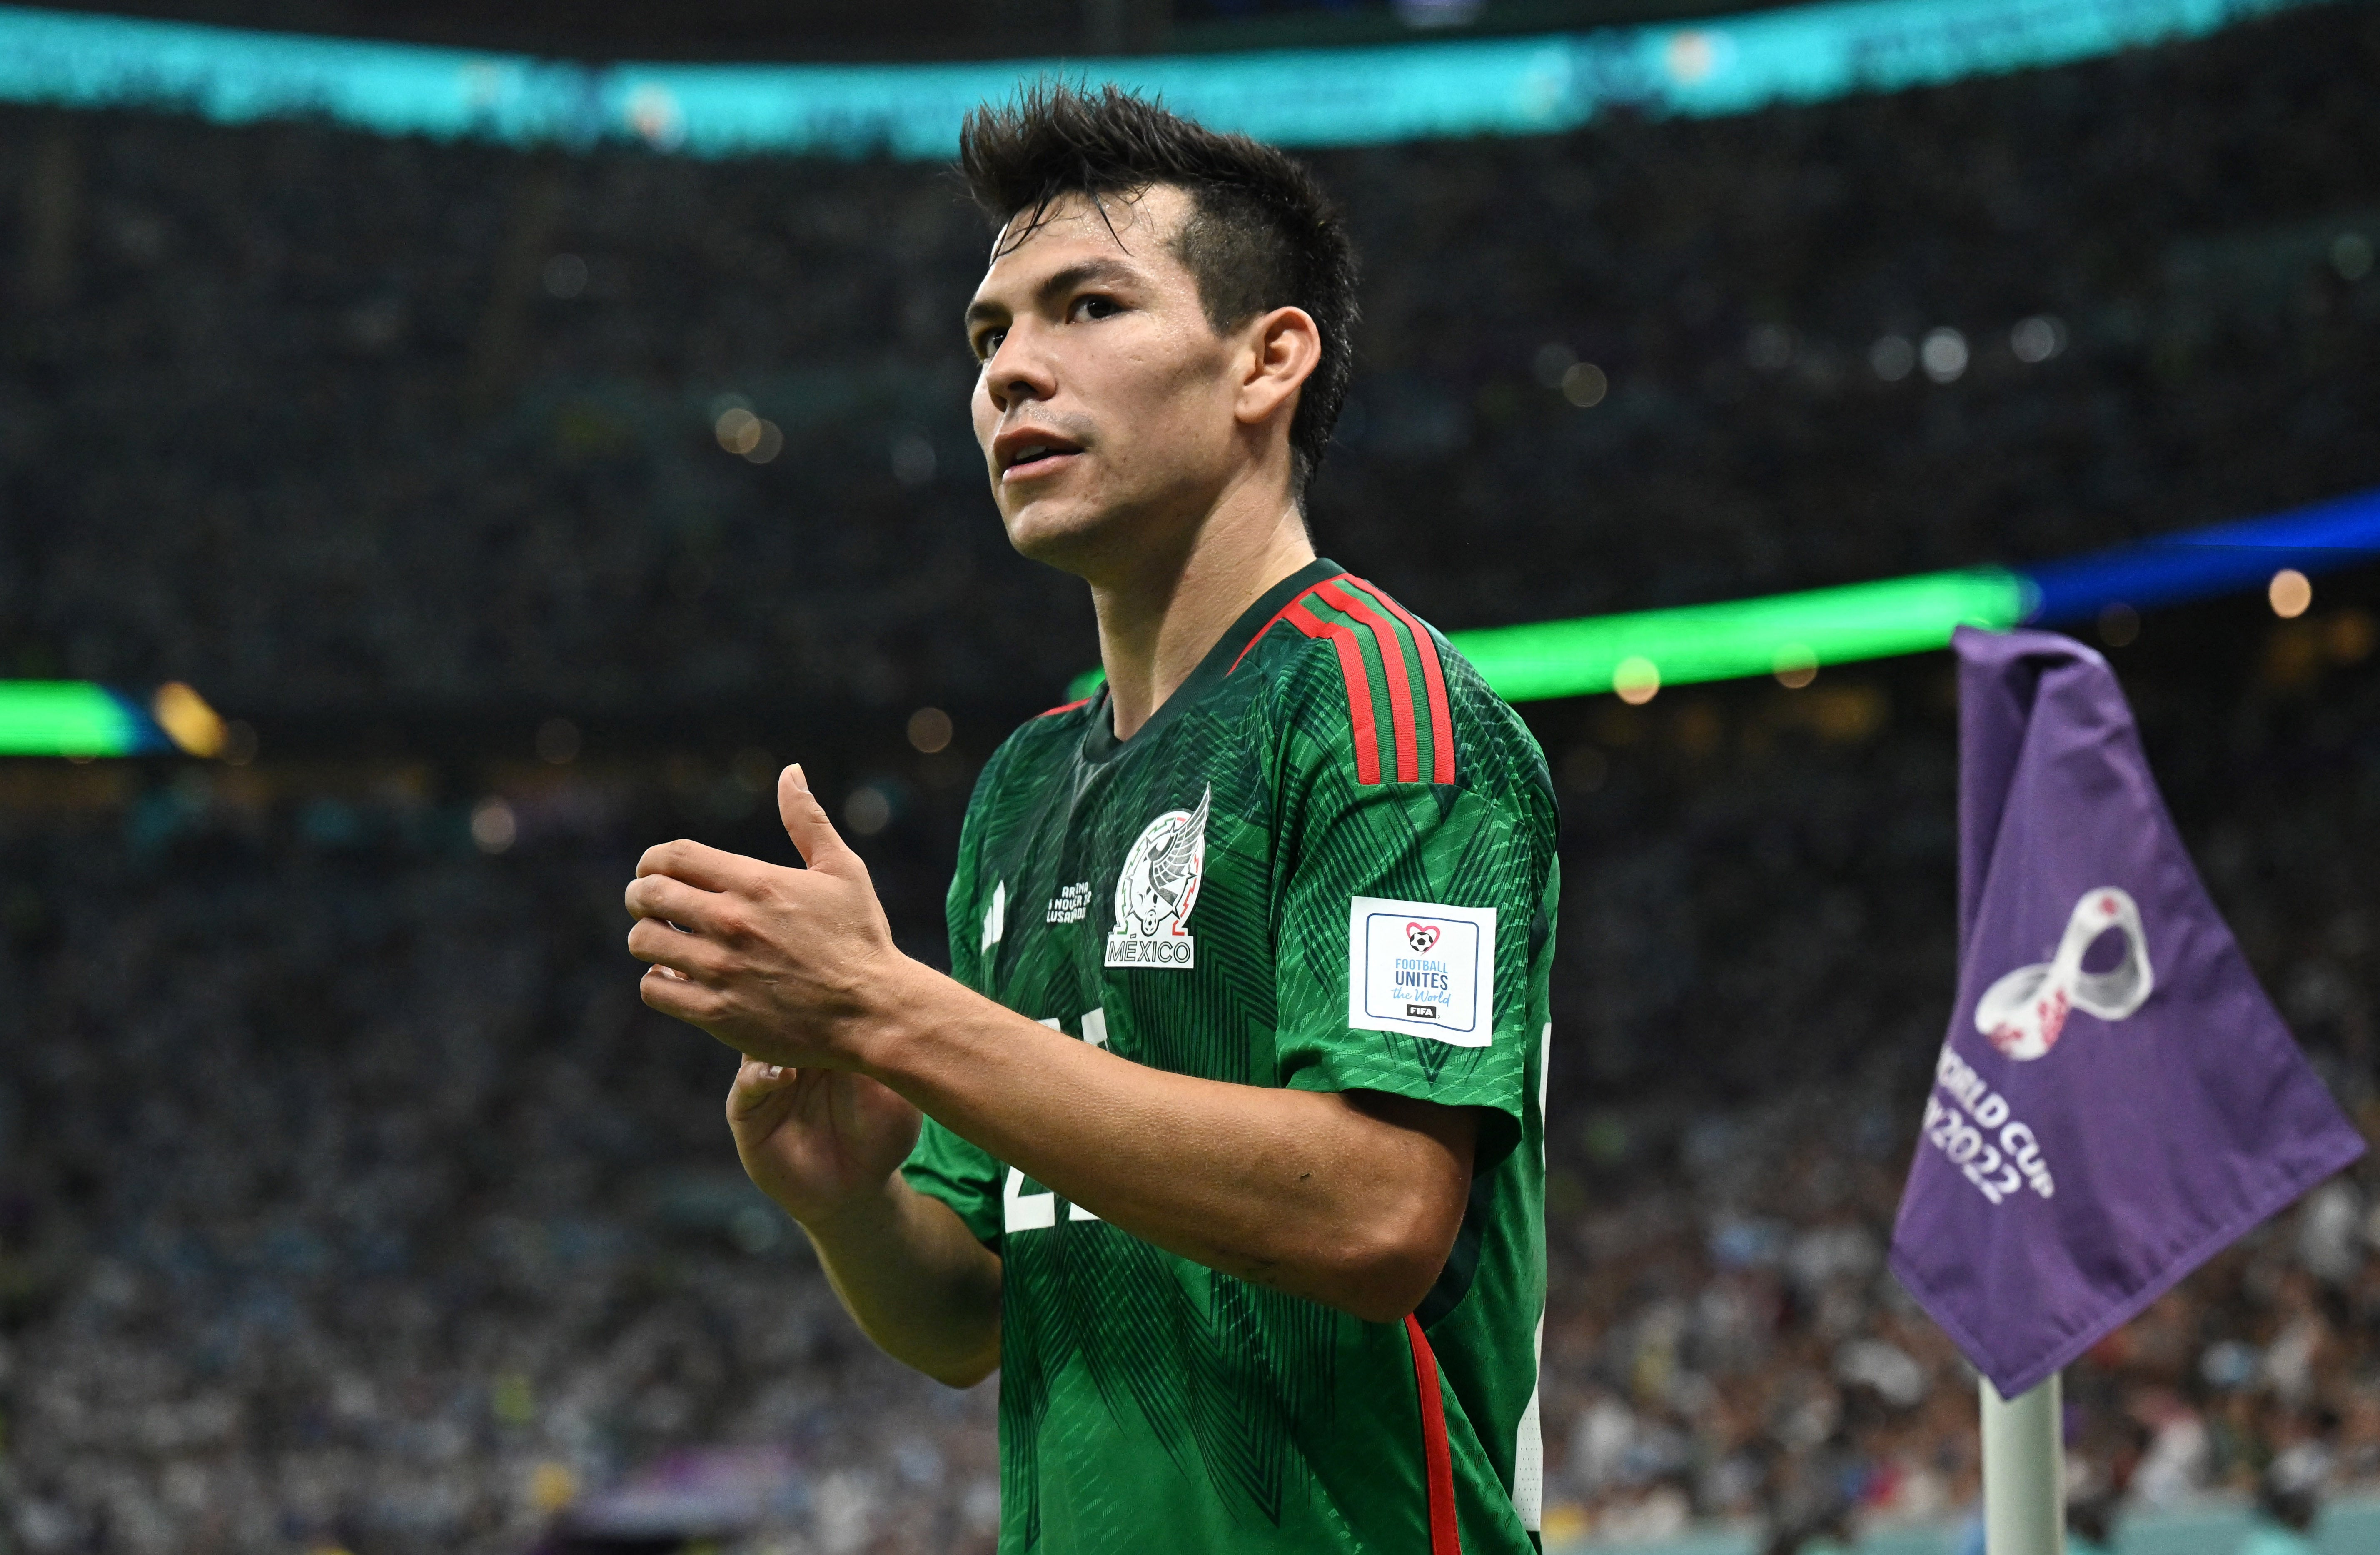 Hirving Lozano showed flashes for Mexico but was subbed off late on